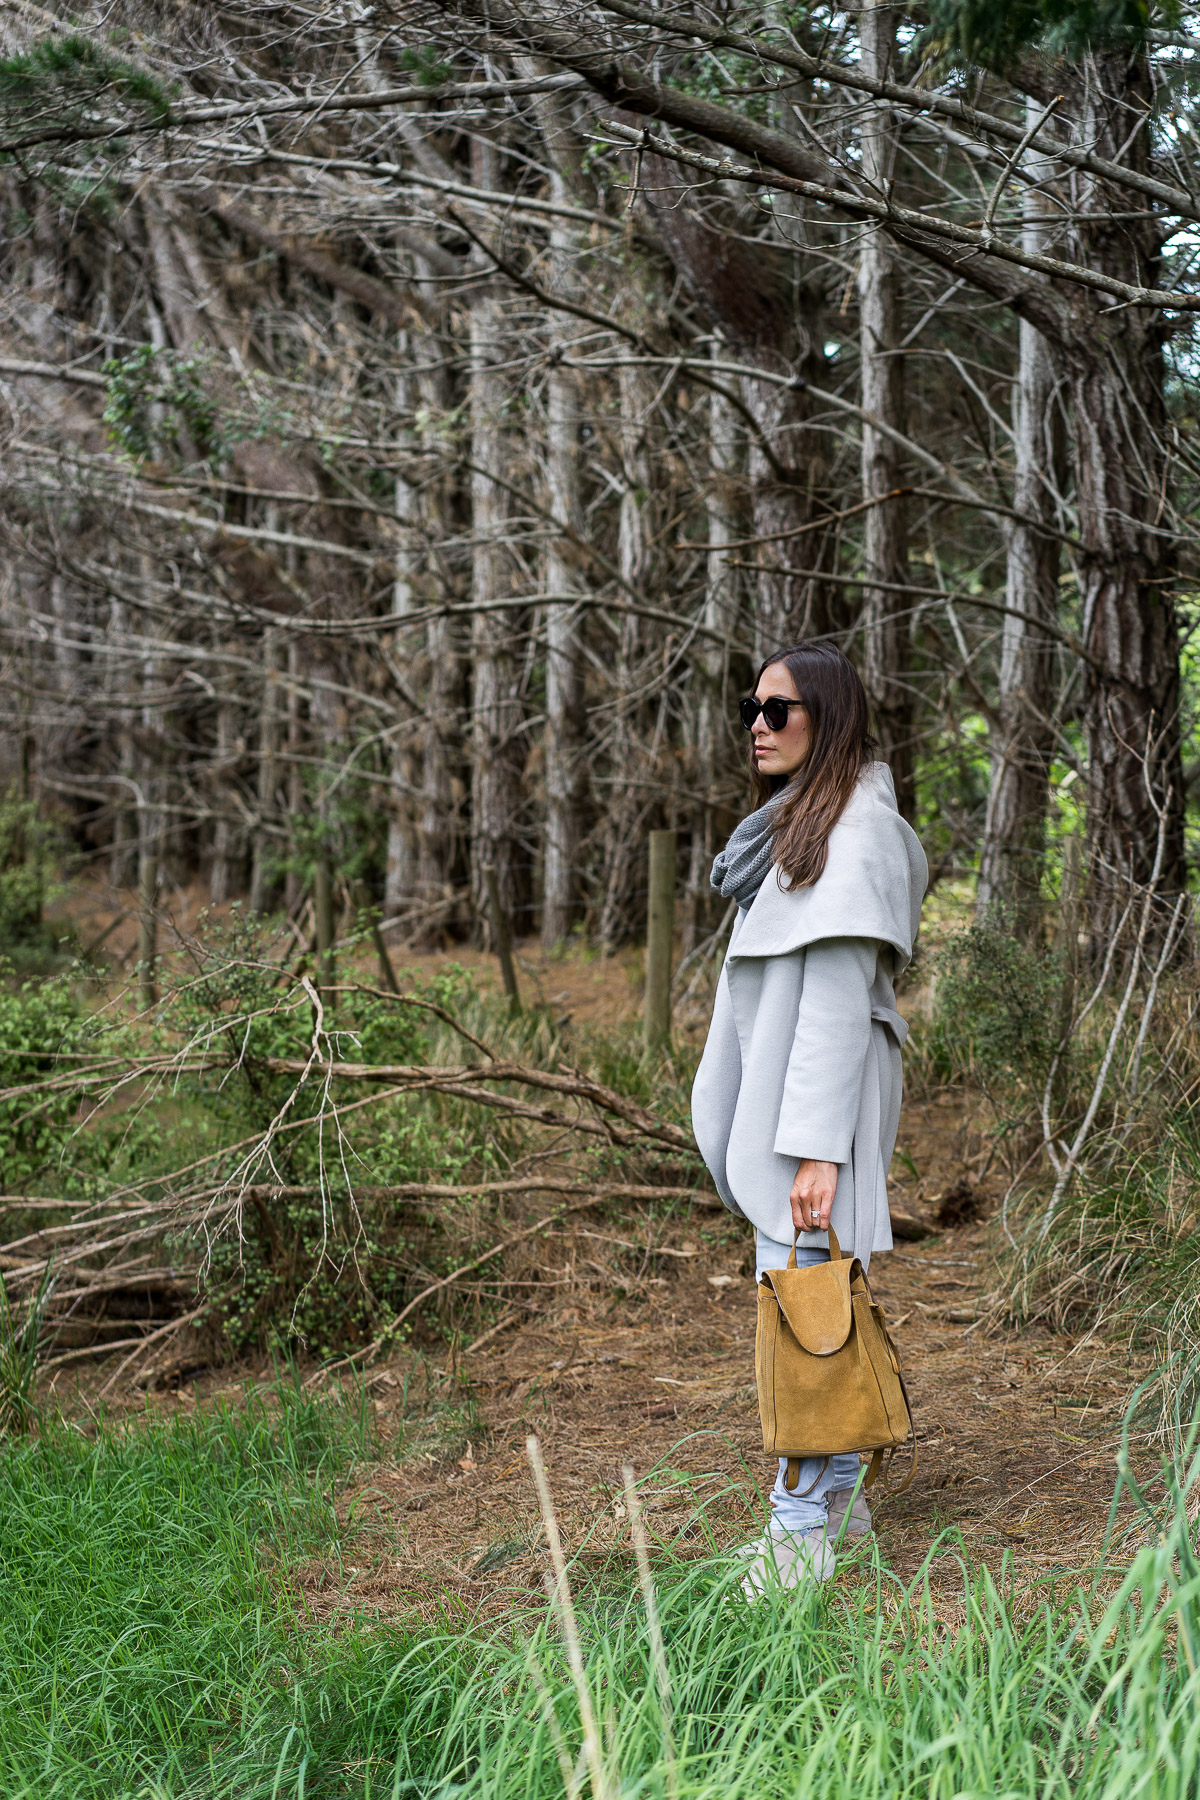 Blogger Amanda from A Glam Lifestyle shares favorite things to do in Waiheke Island including hike to local wineries